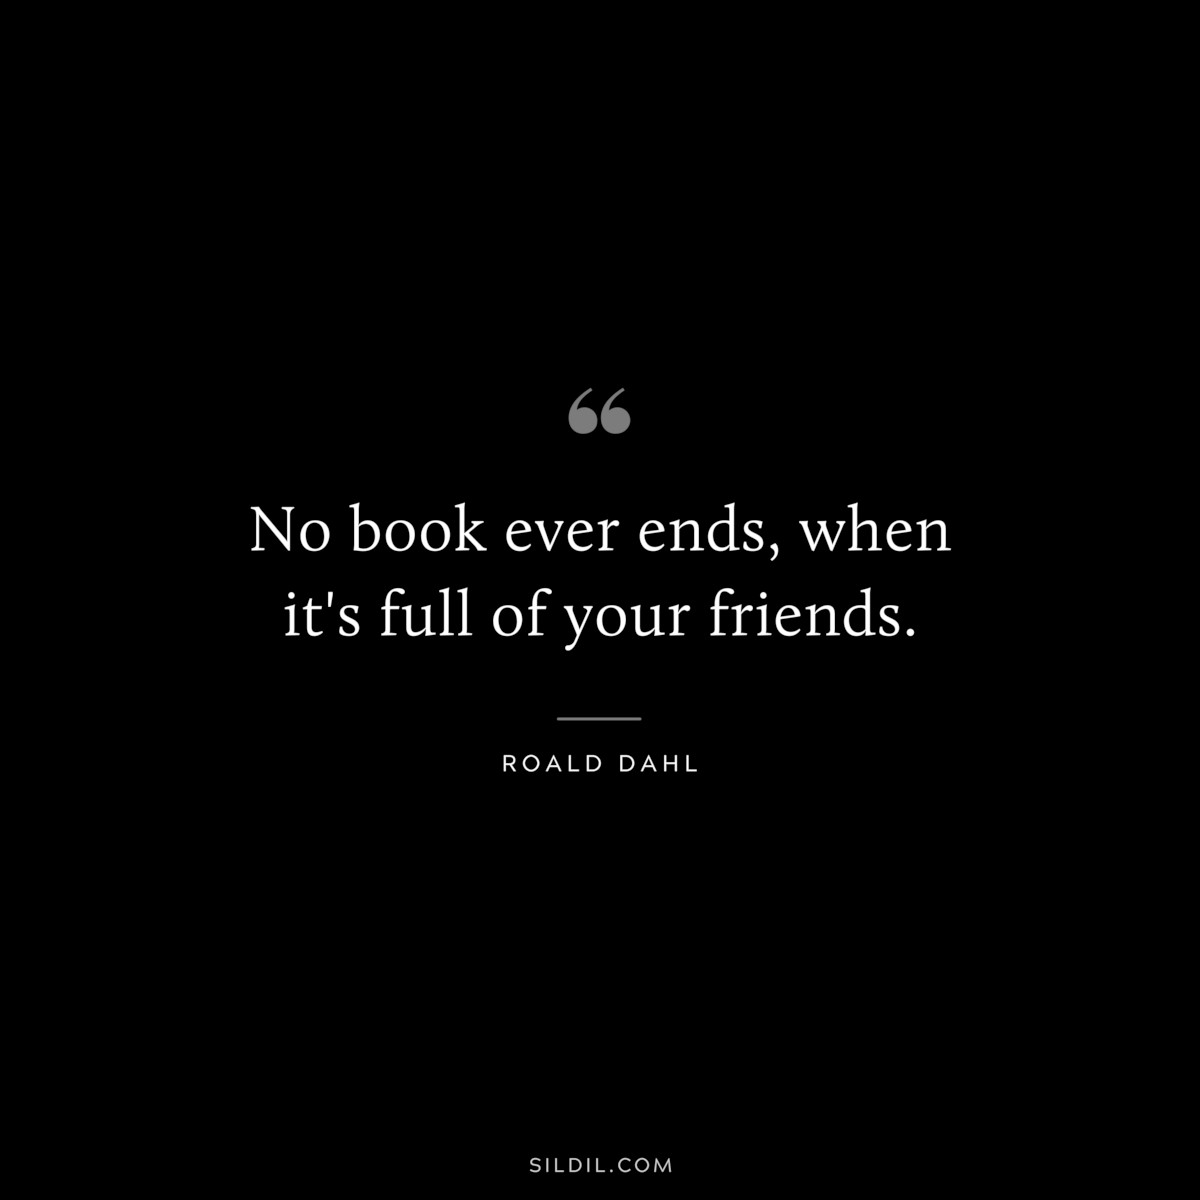 No book ever ends, when it's full of your friends. ― Roald Dahl